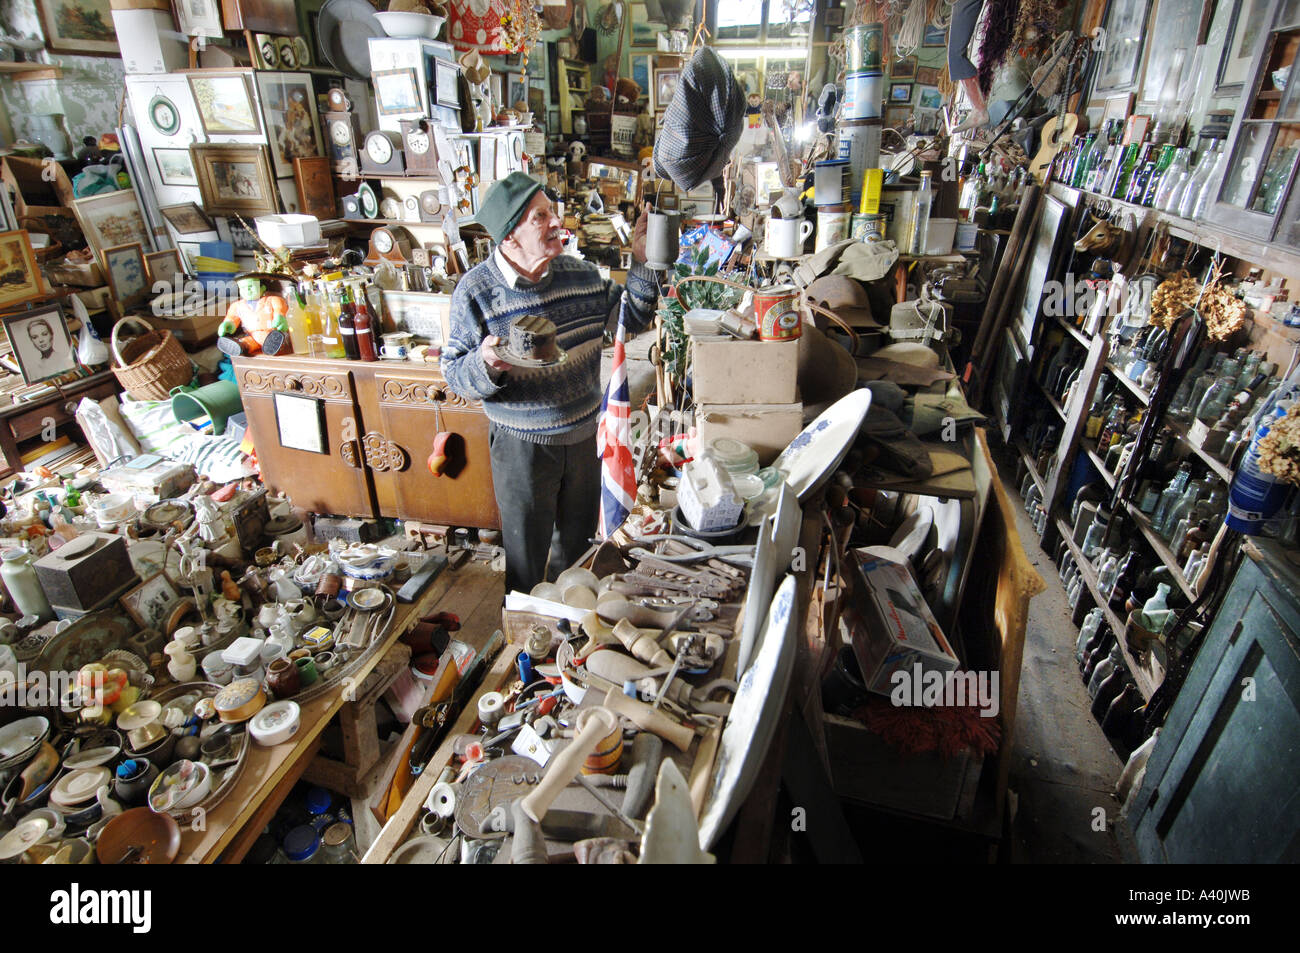 Old man with the thousands of possessions he has hoarded over many decades of never throwing anything away. Stock Photo